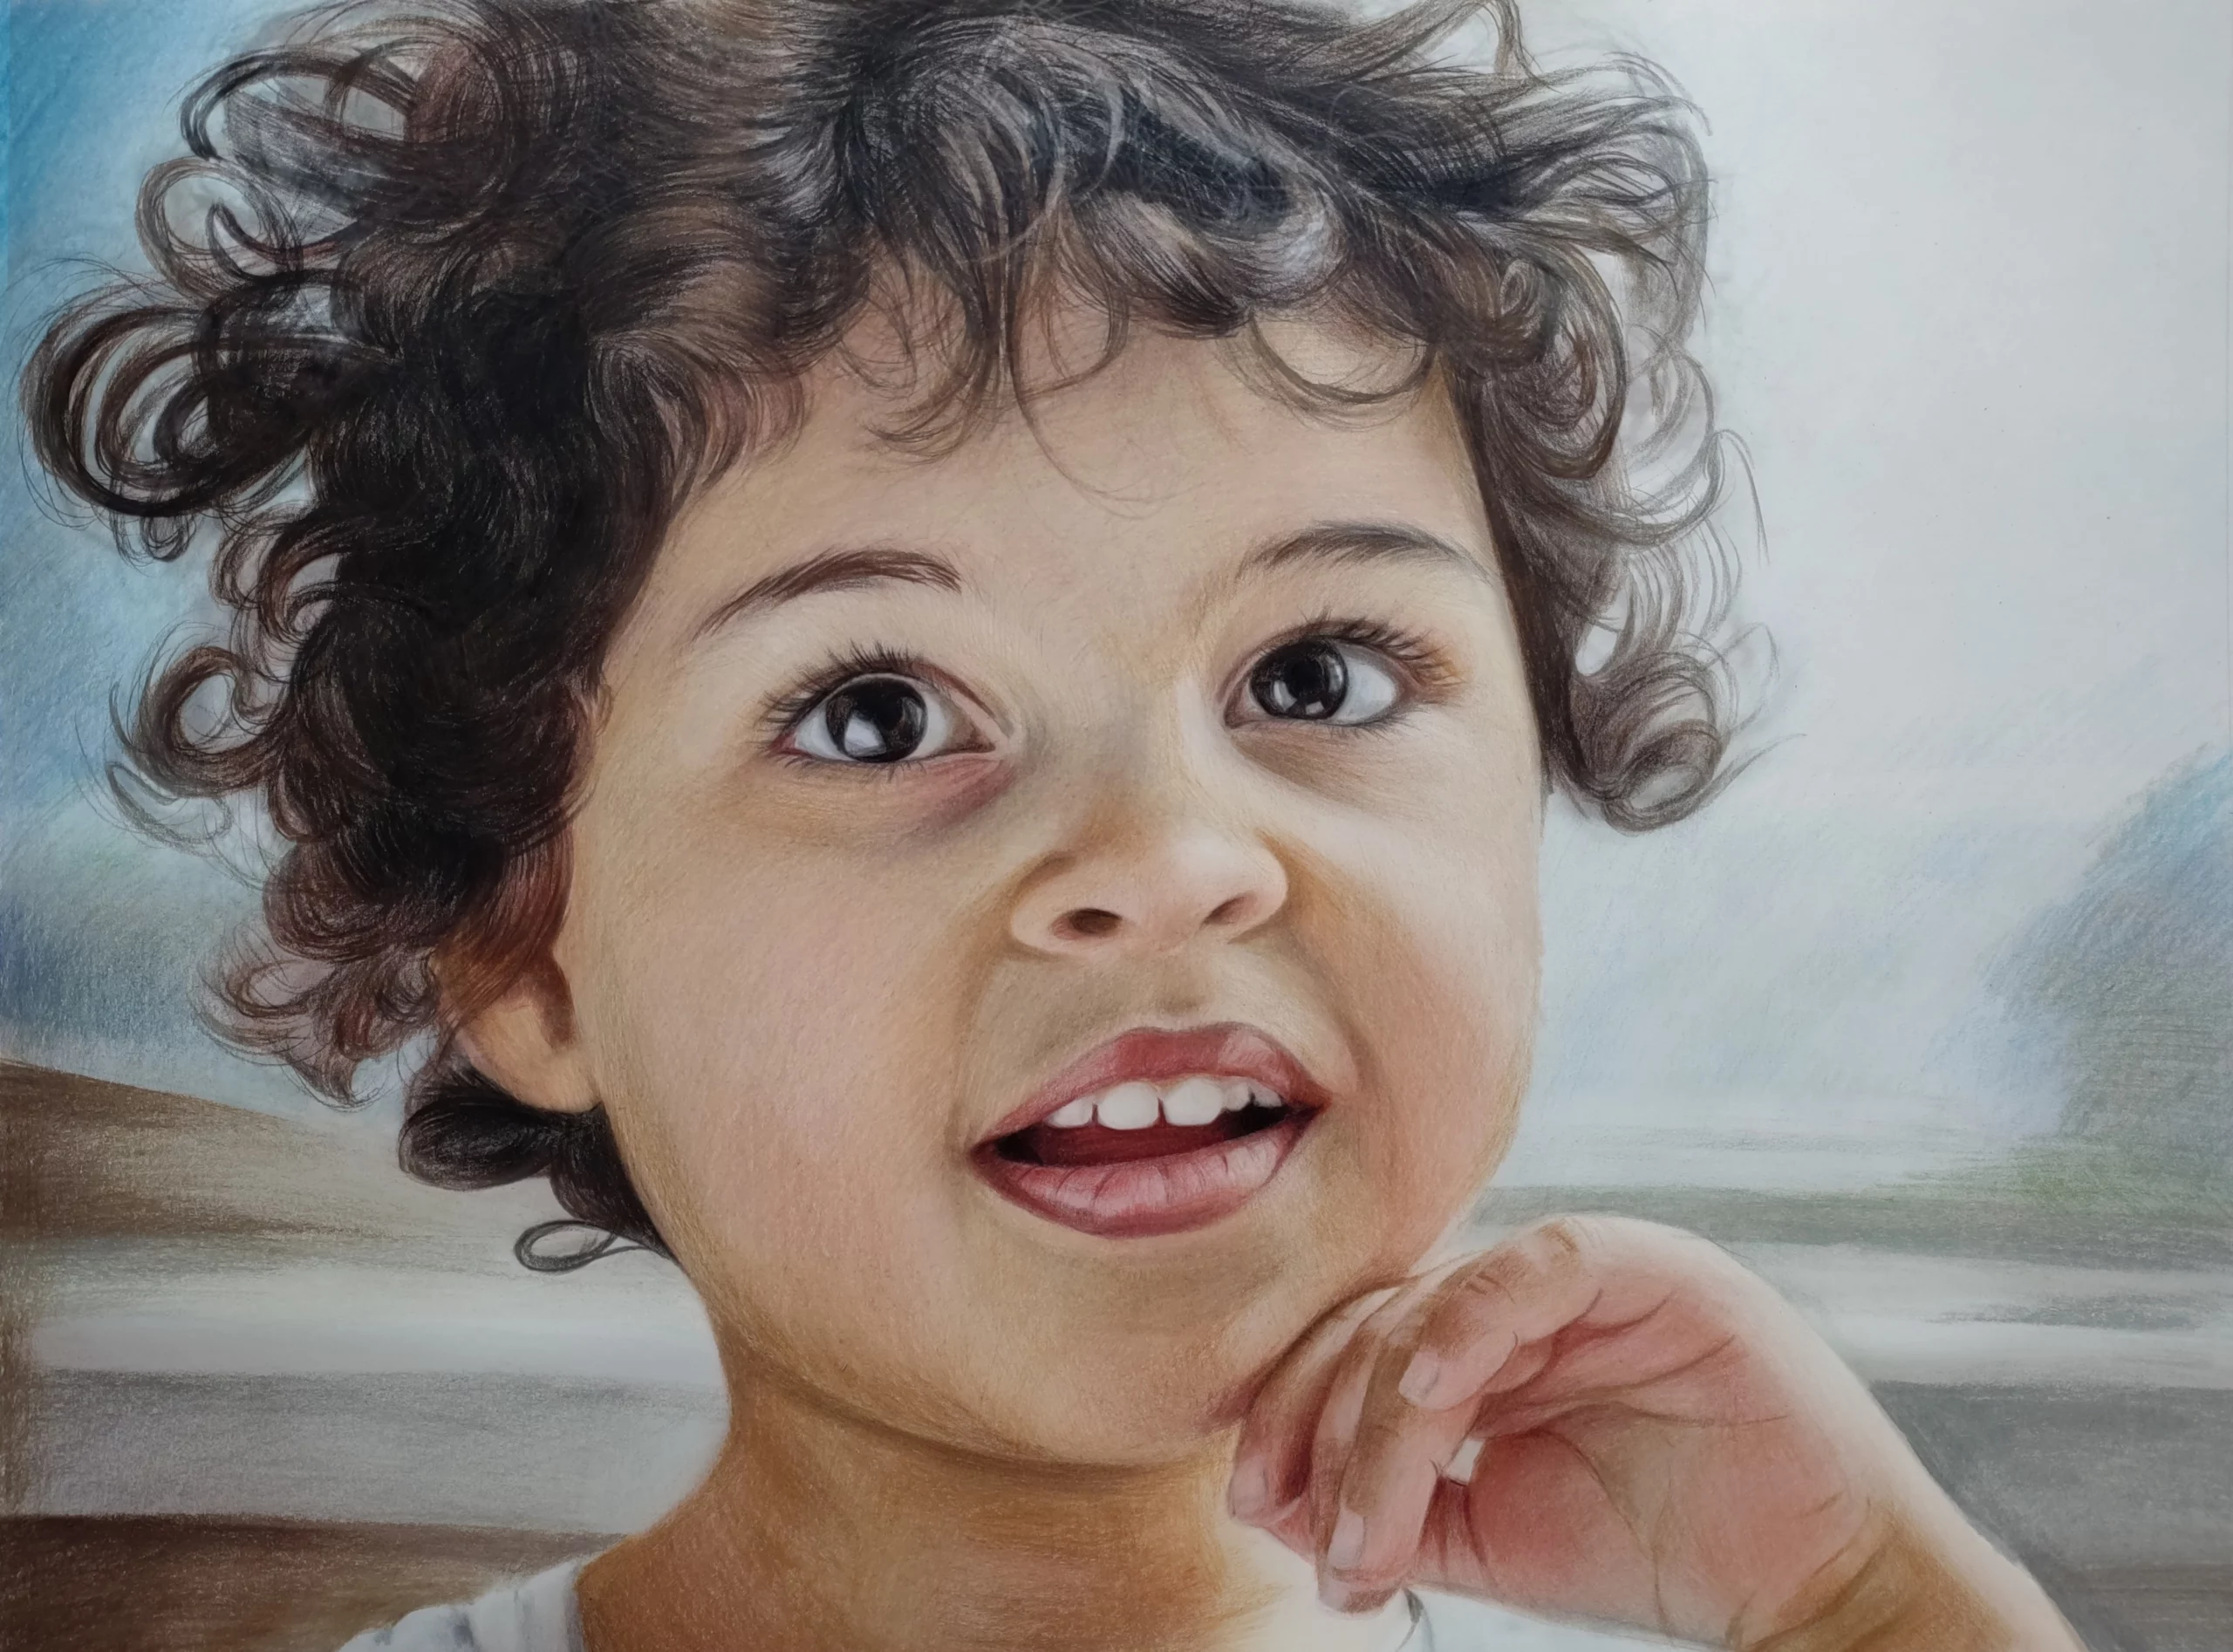 Best Mother Day Gift for Girlfriend - Color Pencil Portrait